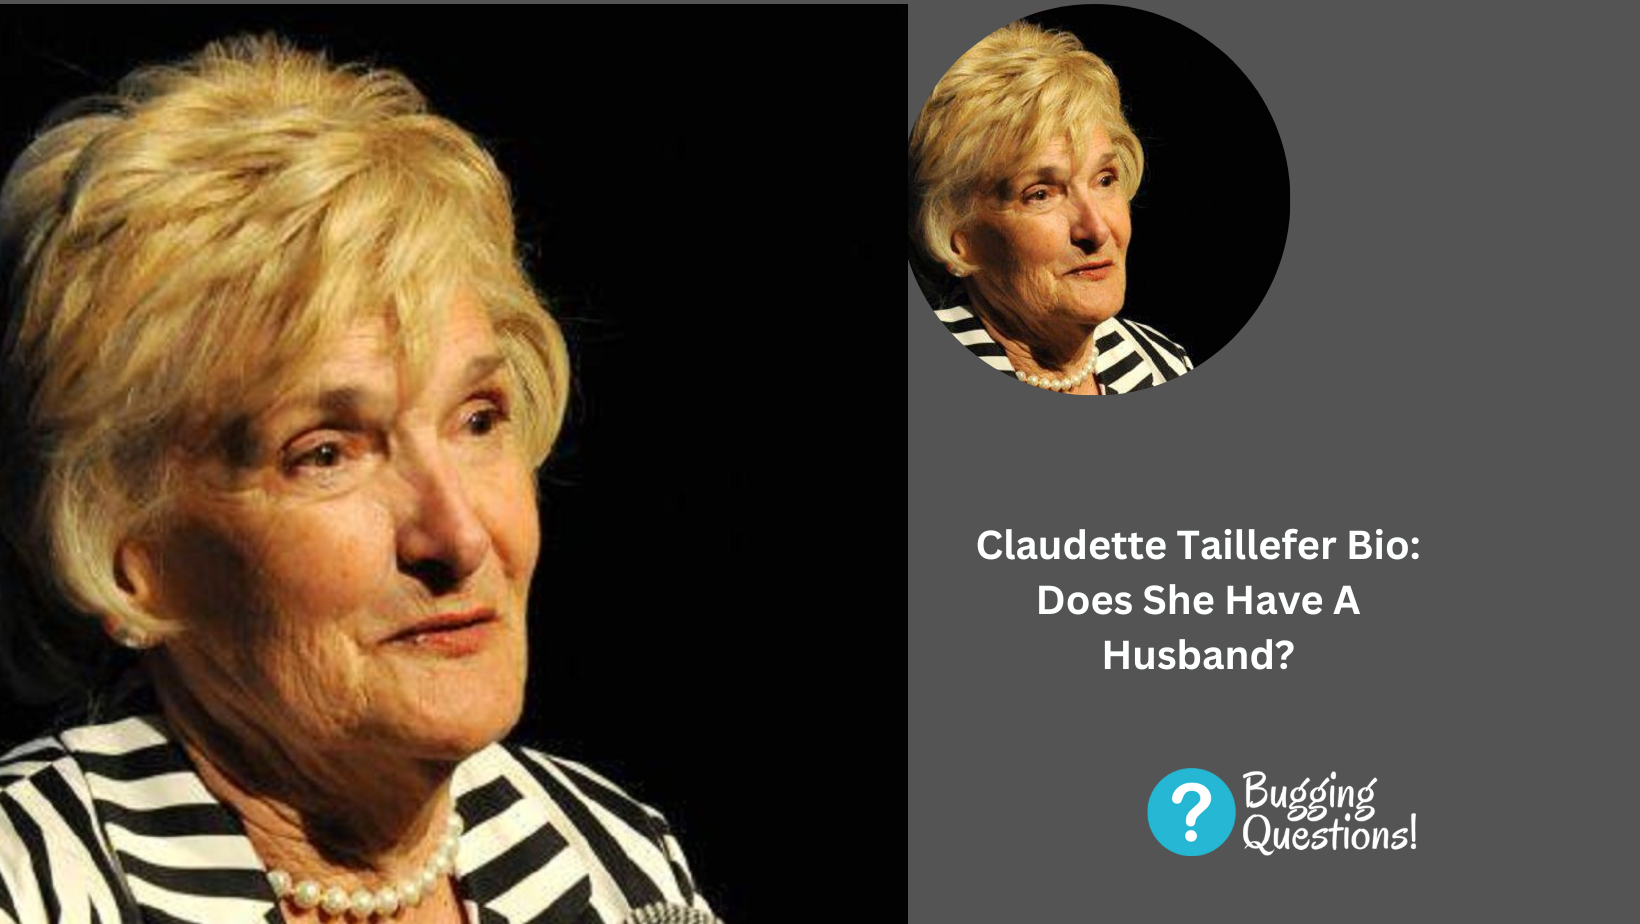 Claudette Taillefer Bio: Does She Have A Husband?